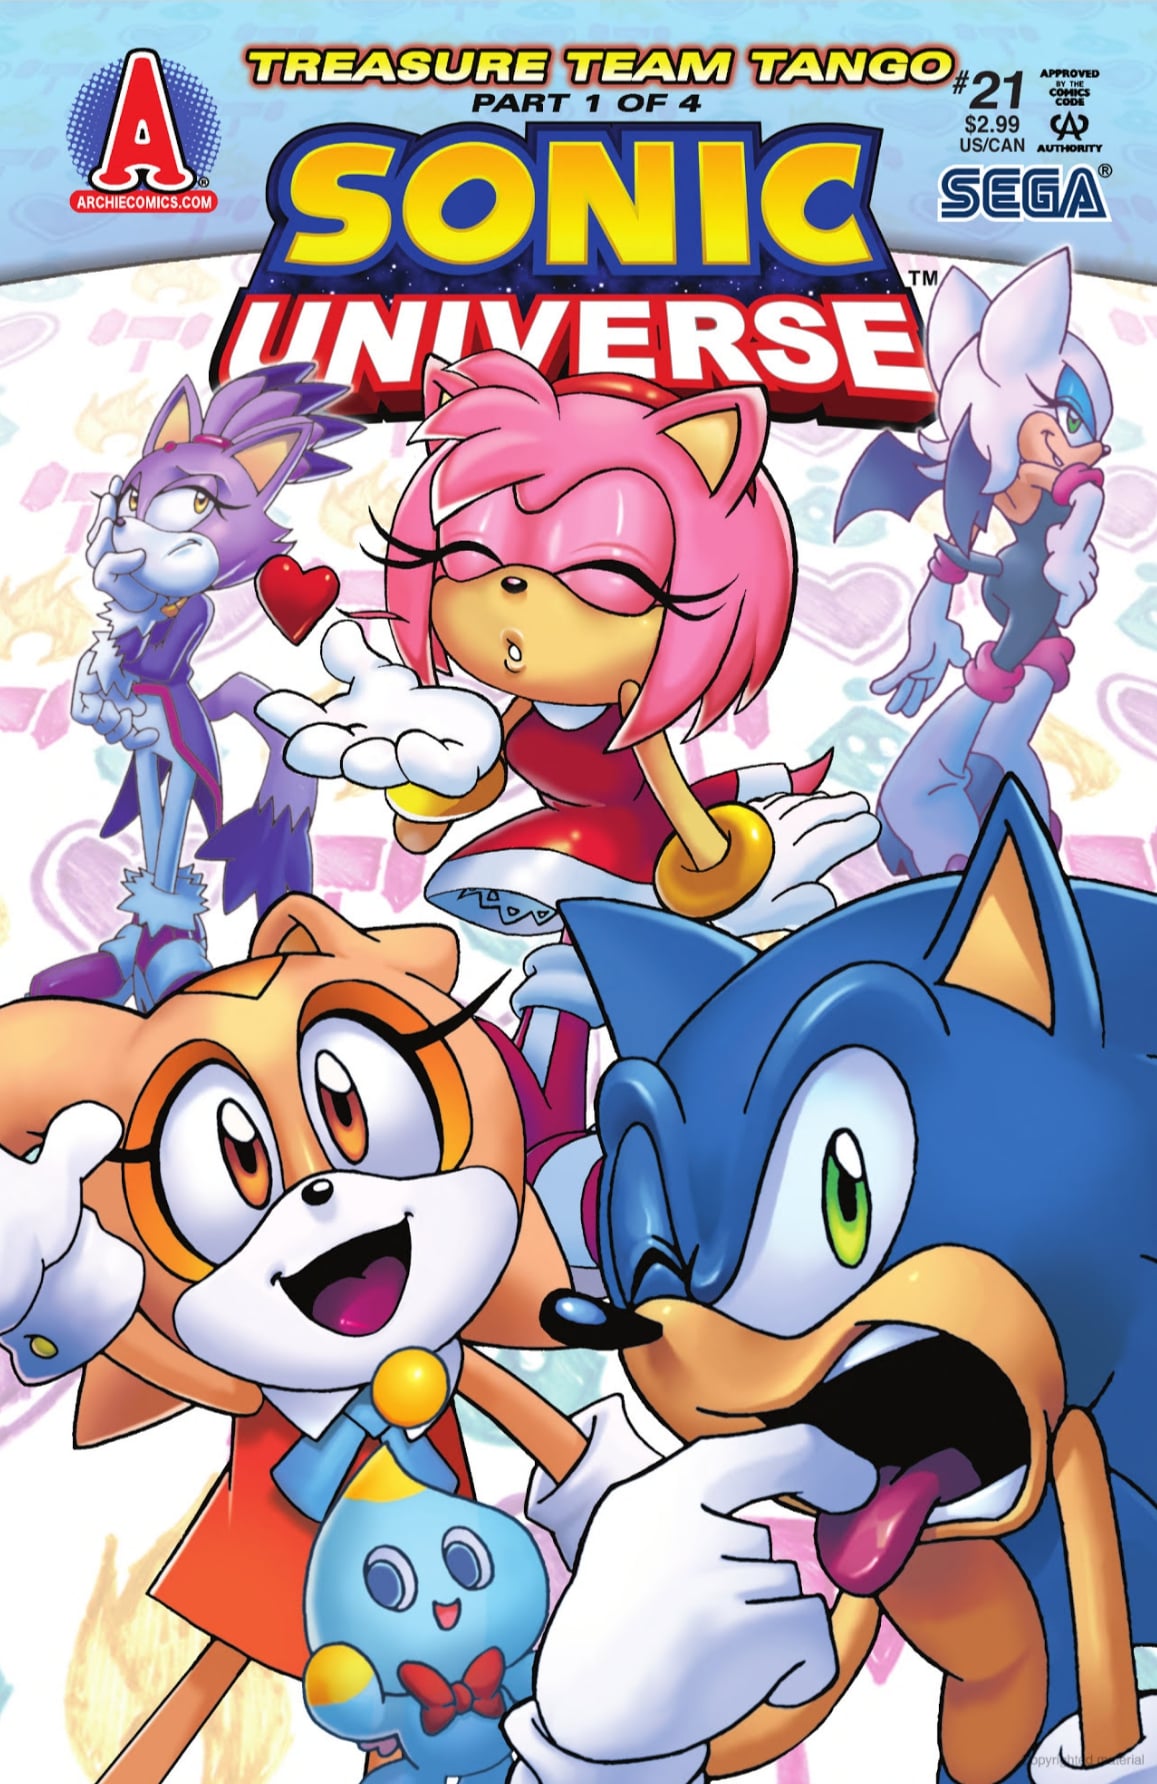 Archie Sonic Universe Issue 21 | Sonic News Network | Fandom powered by Wikia